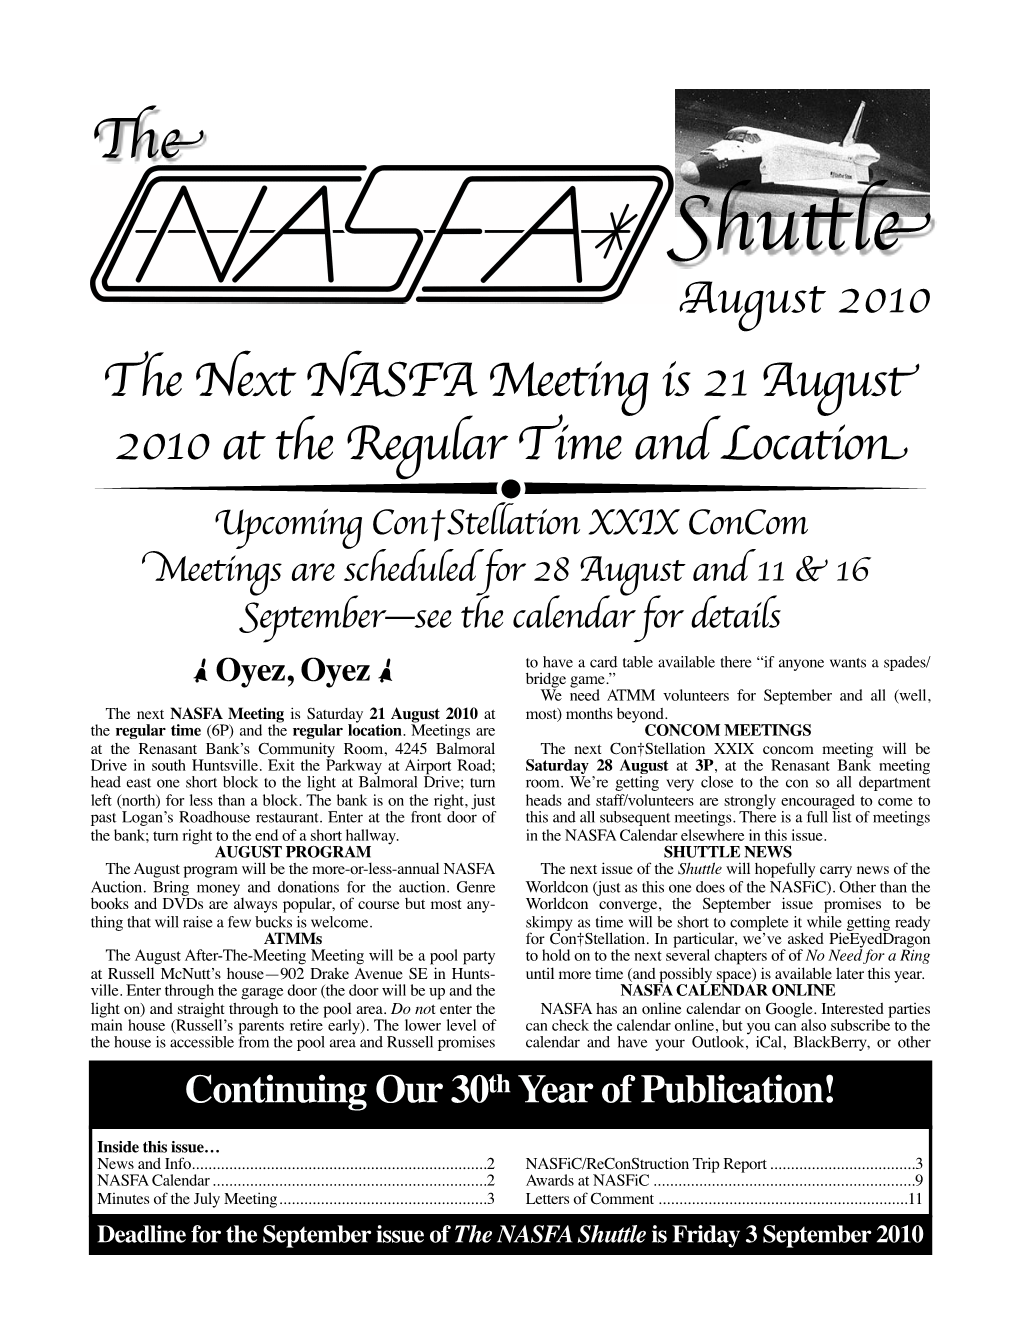 NASFA Calendar Elsewhere in This Issue